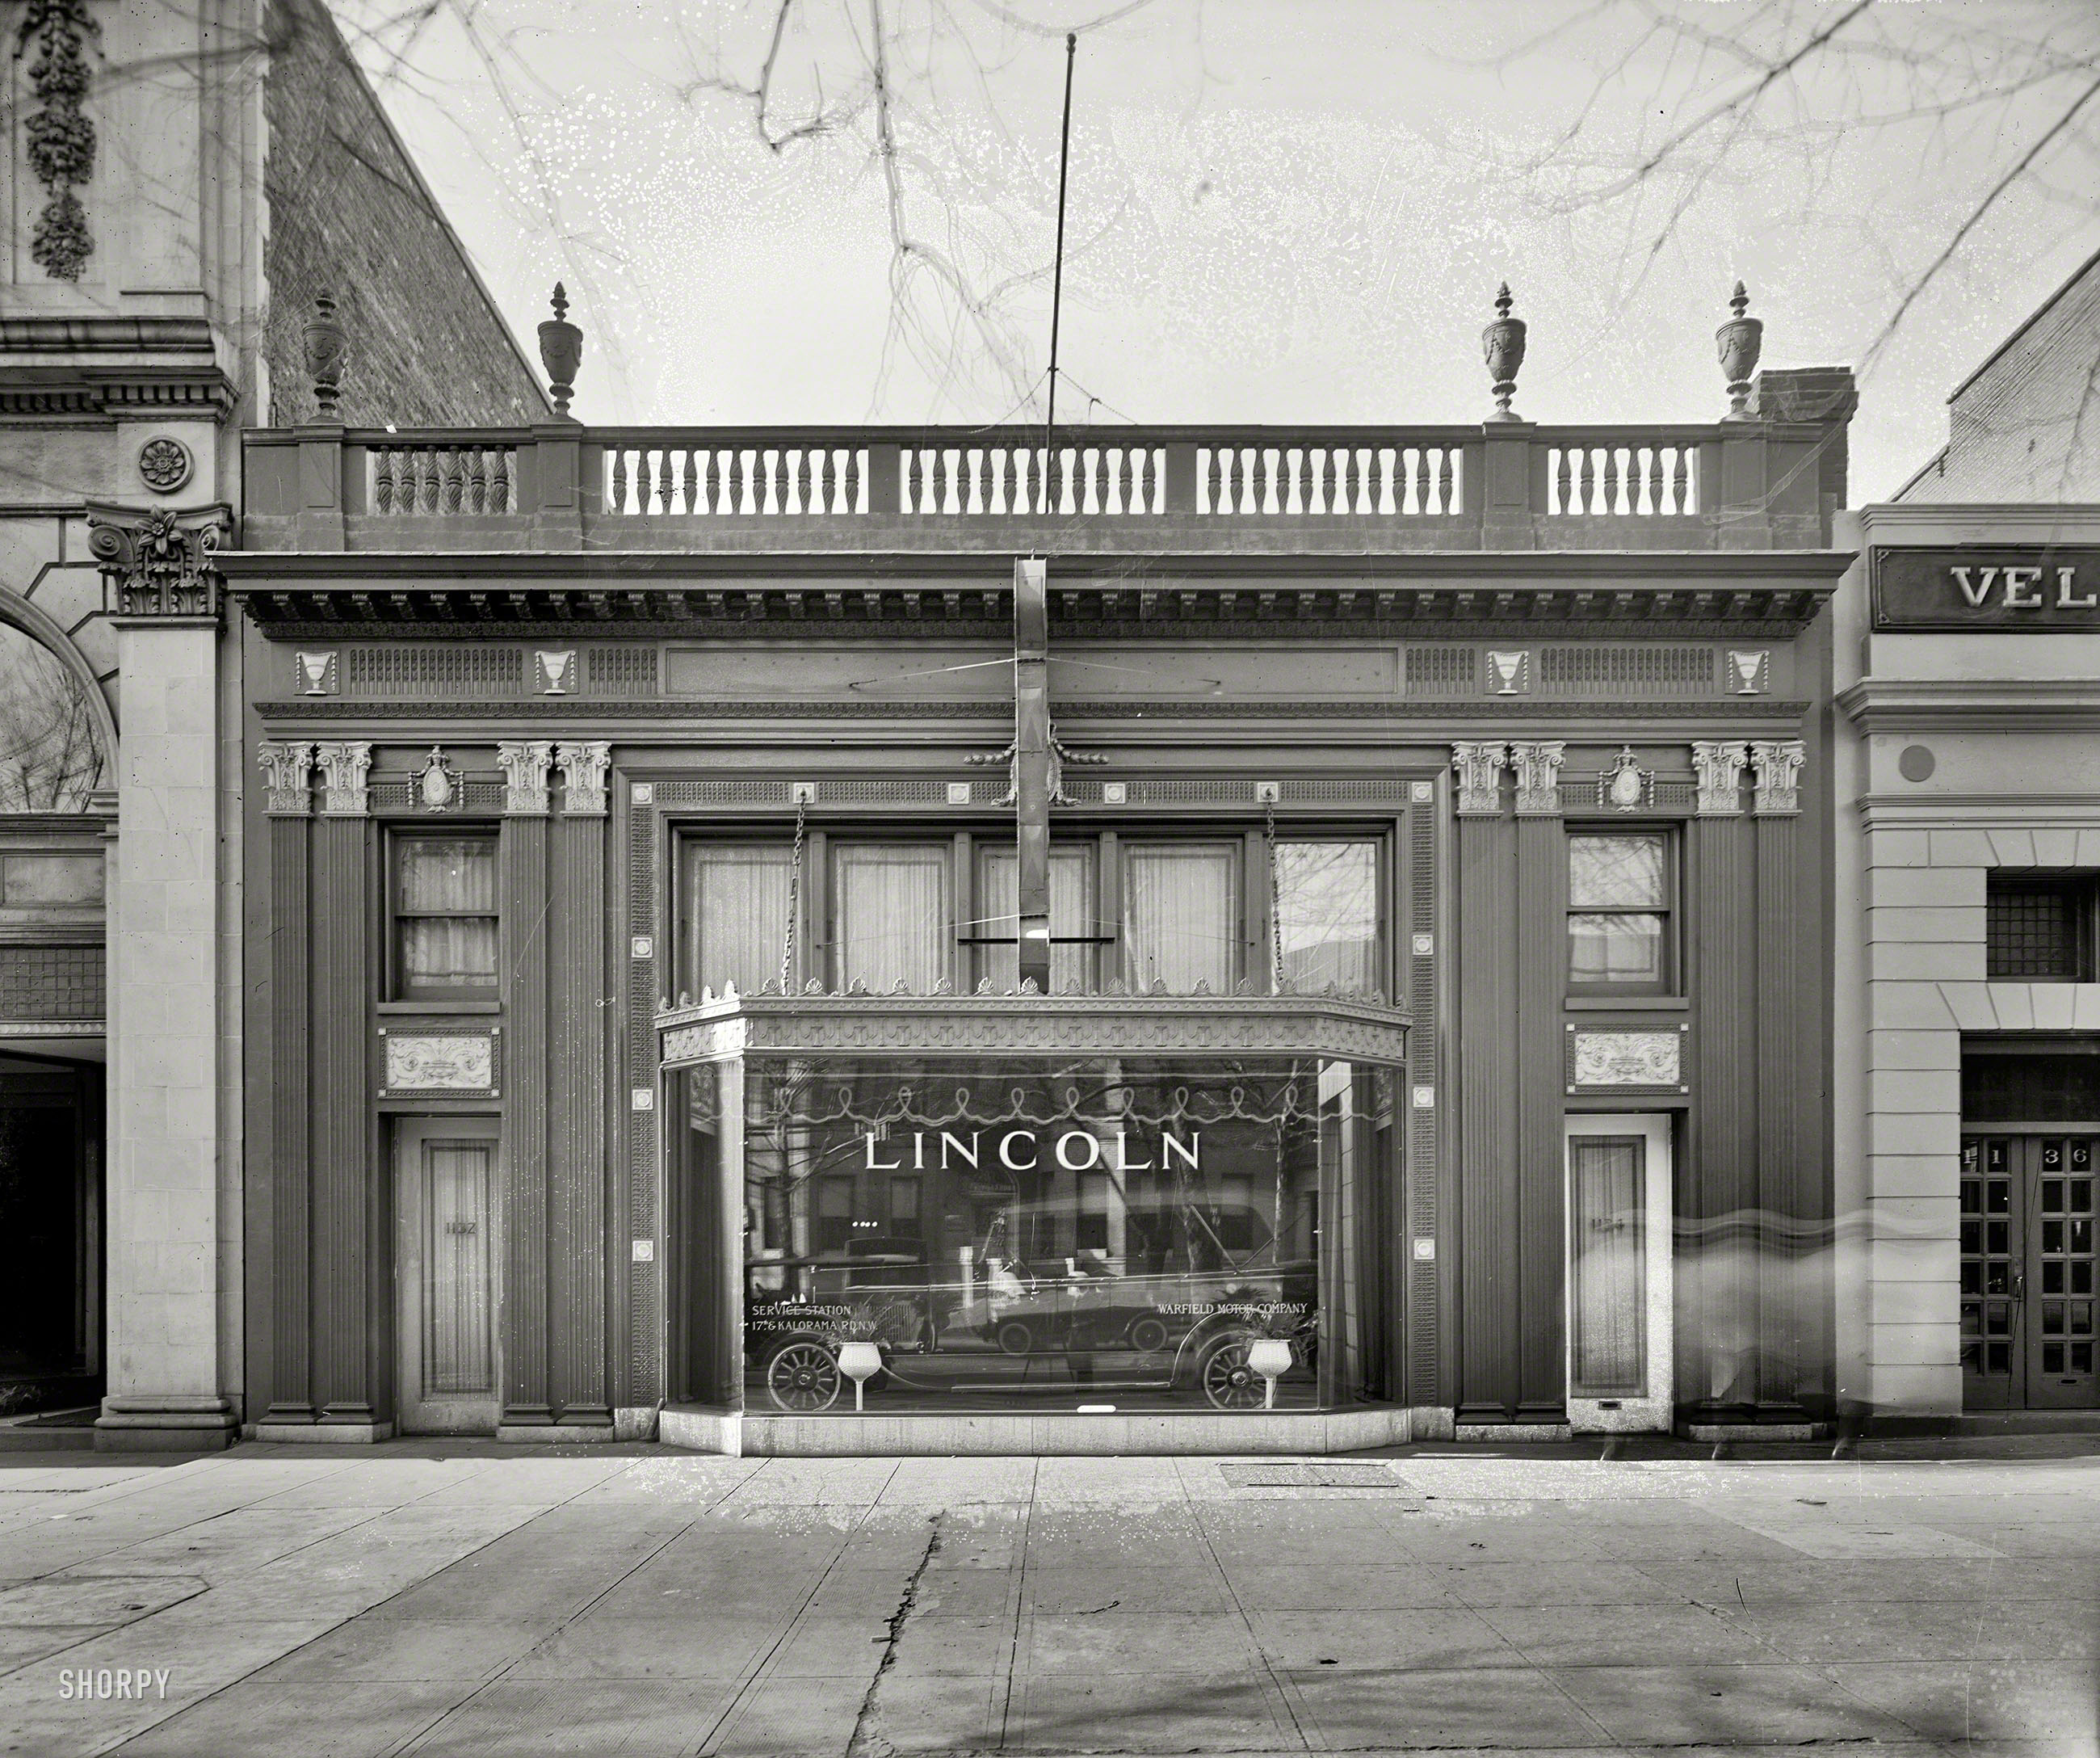 Washington, D.C., circa 1925. "Exterior, Warfield Motor Co." The Lincoln dealer whose service garage we recently saw here. In 1927 the company moved next door into the building on the left. National Photo Co. View full size.